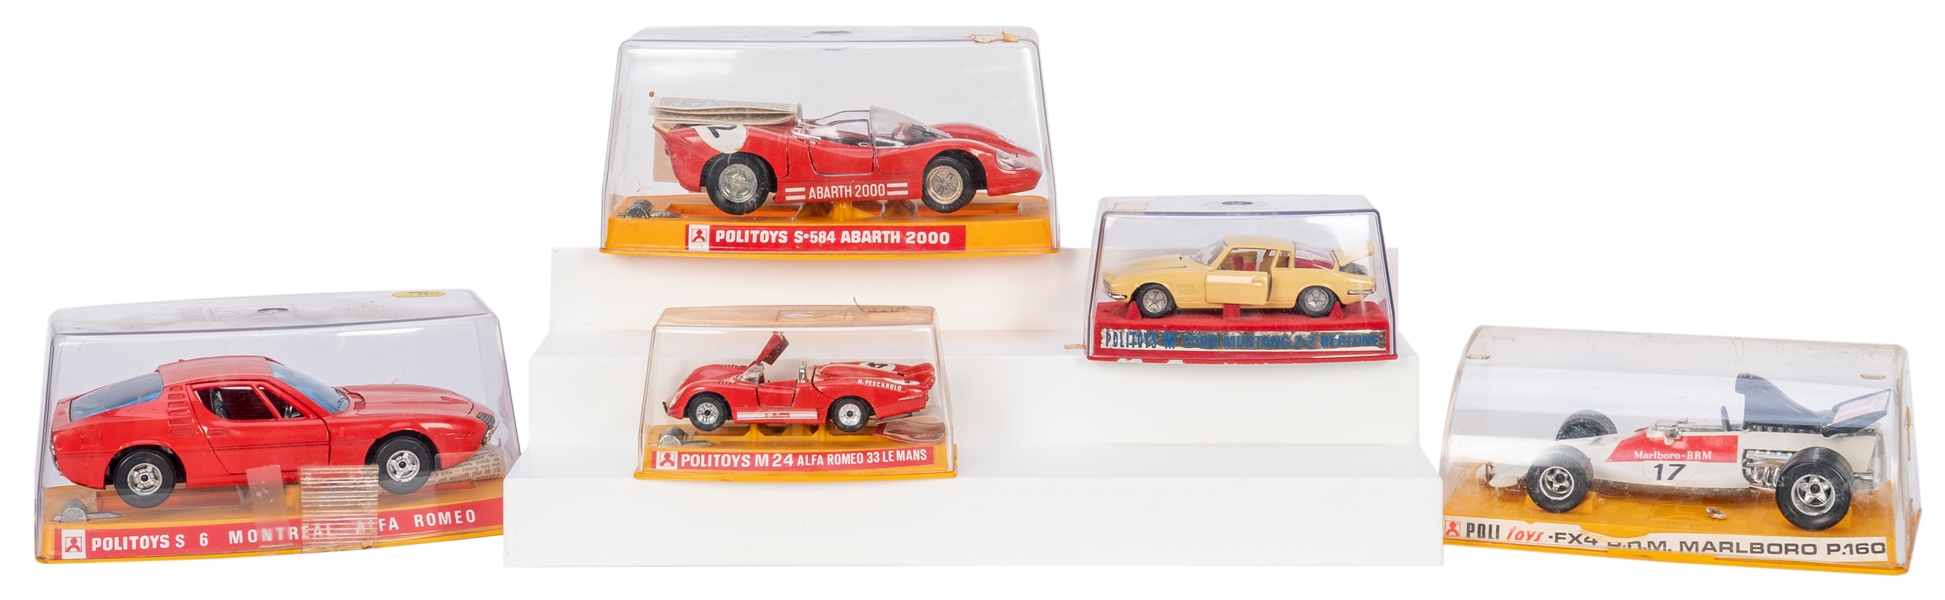  Group of 5 Politoys Diecast Sports Car in Boxes. Including ...